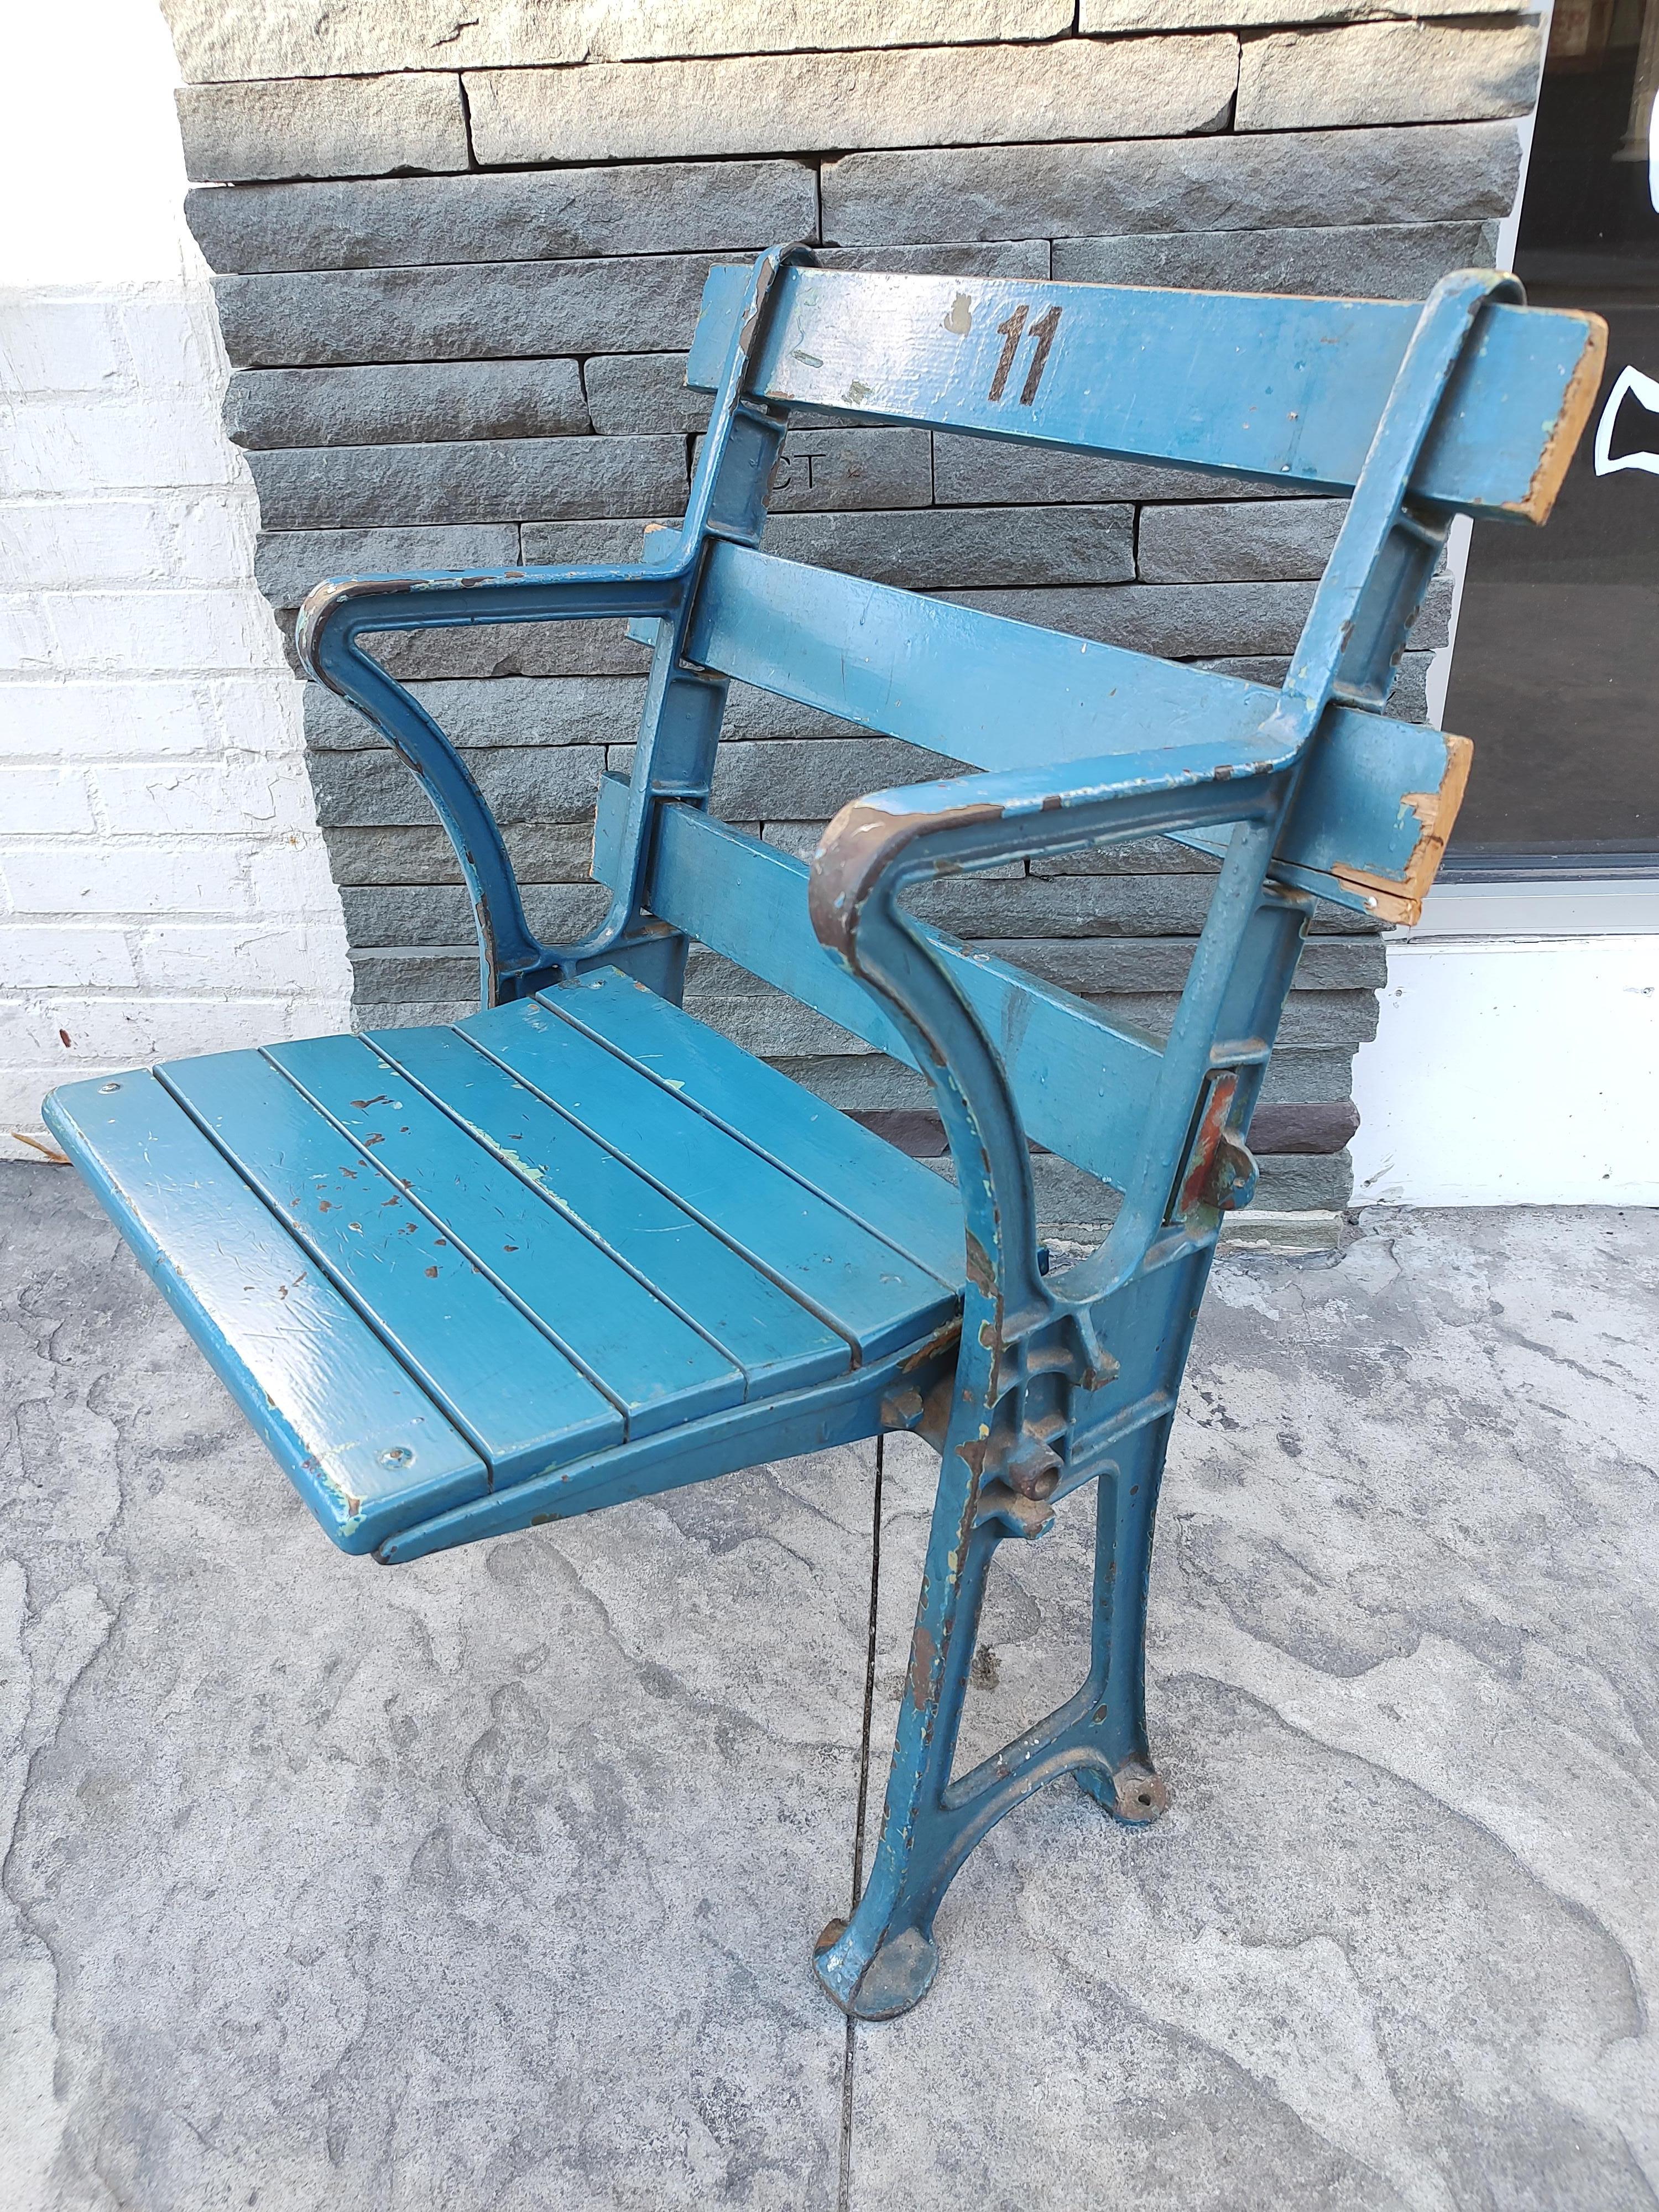 Fabulous and hard to find, an original foldup chair from the original Yankee Stadium built and completed in 1923, 